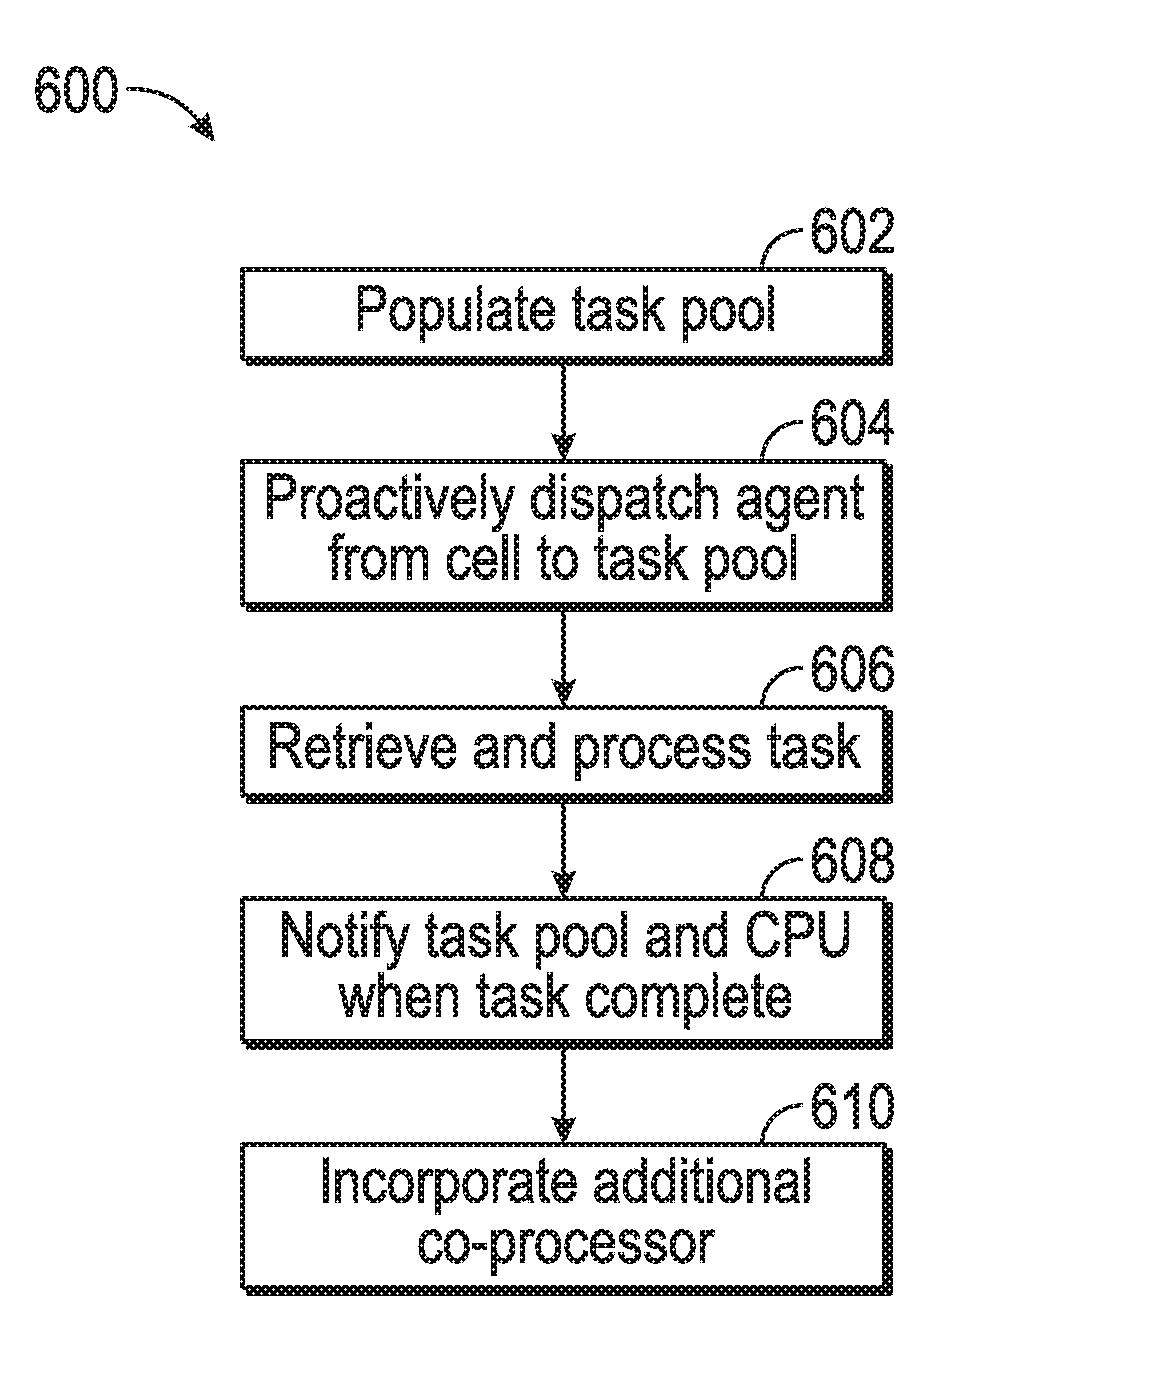 System and method for parallel processing using dynamically configurable proactive co-processing cells